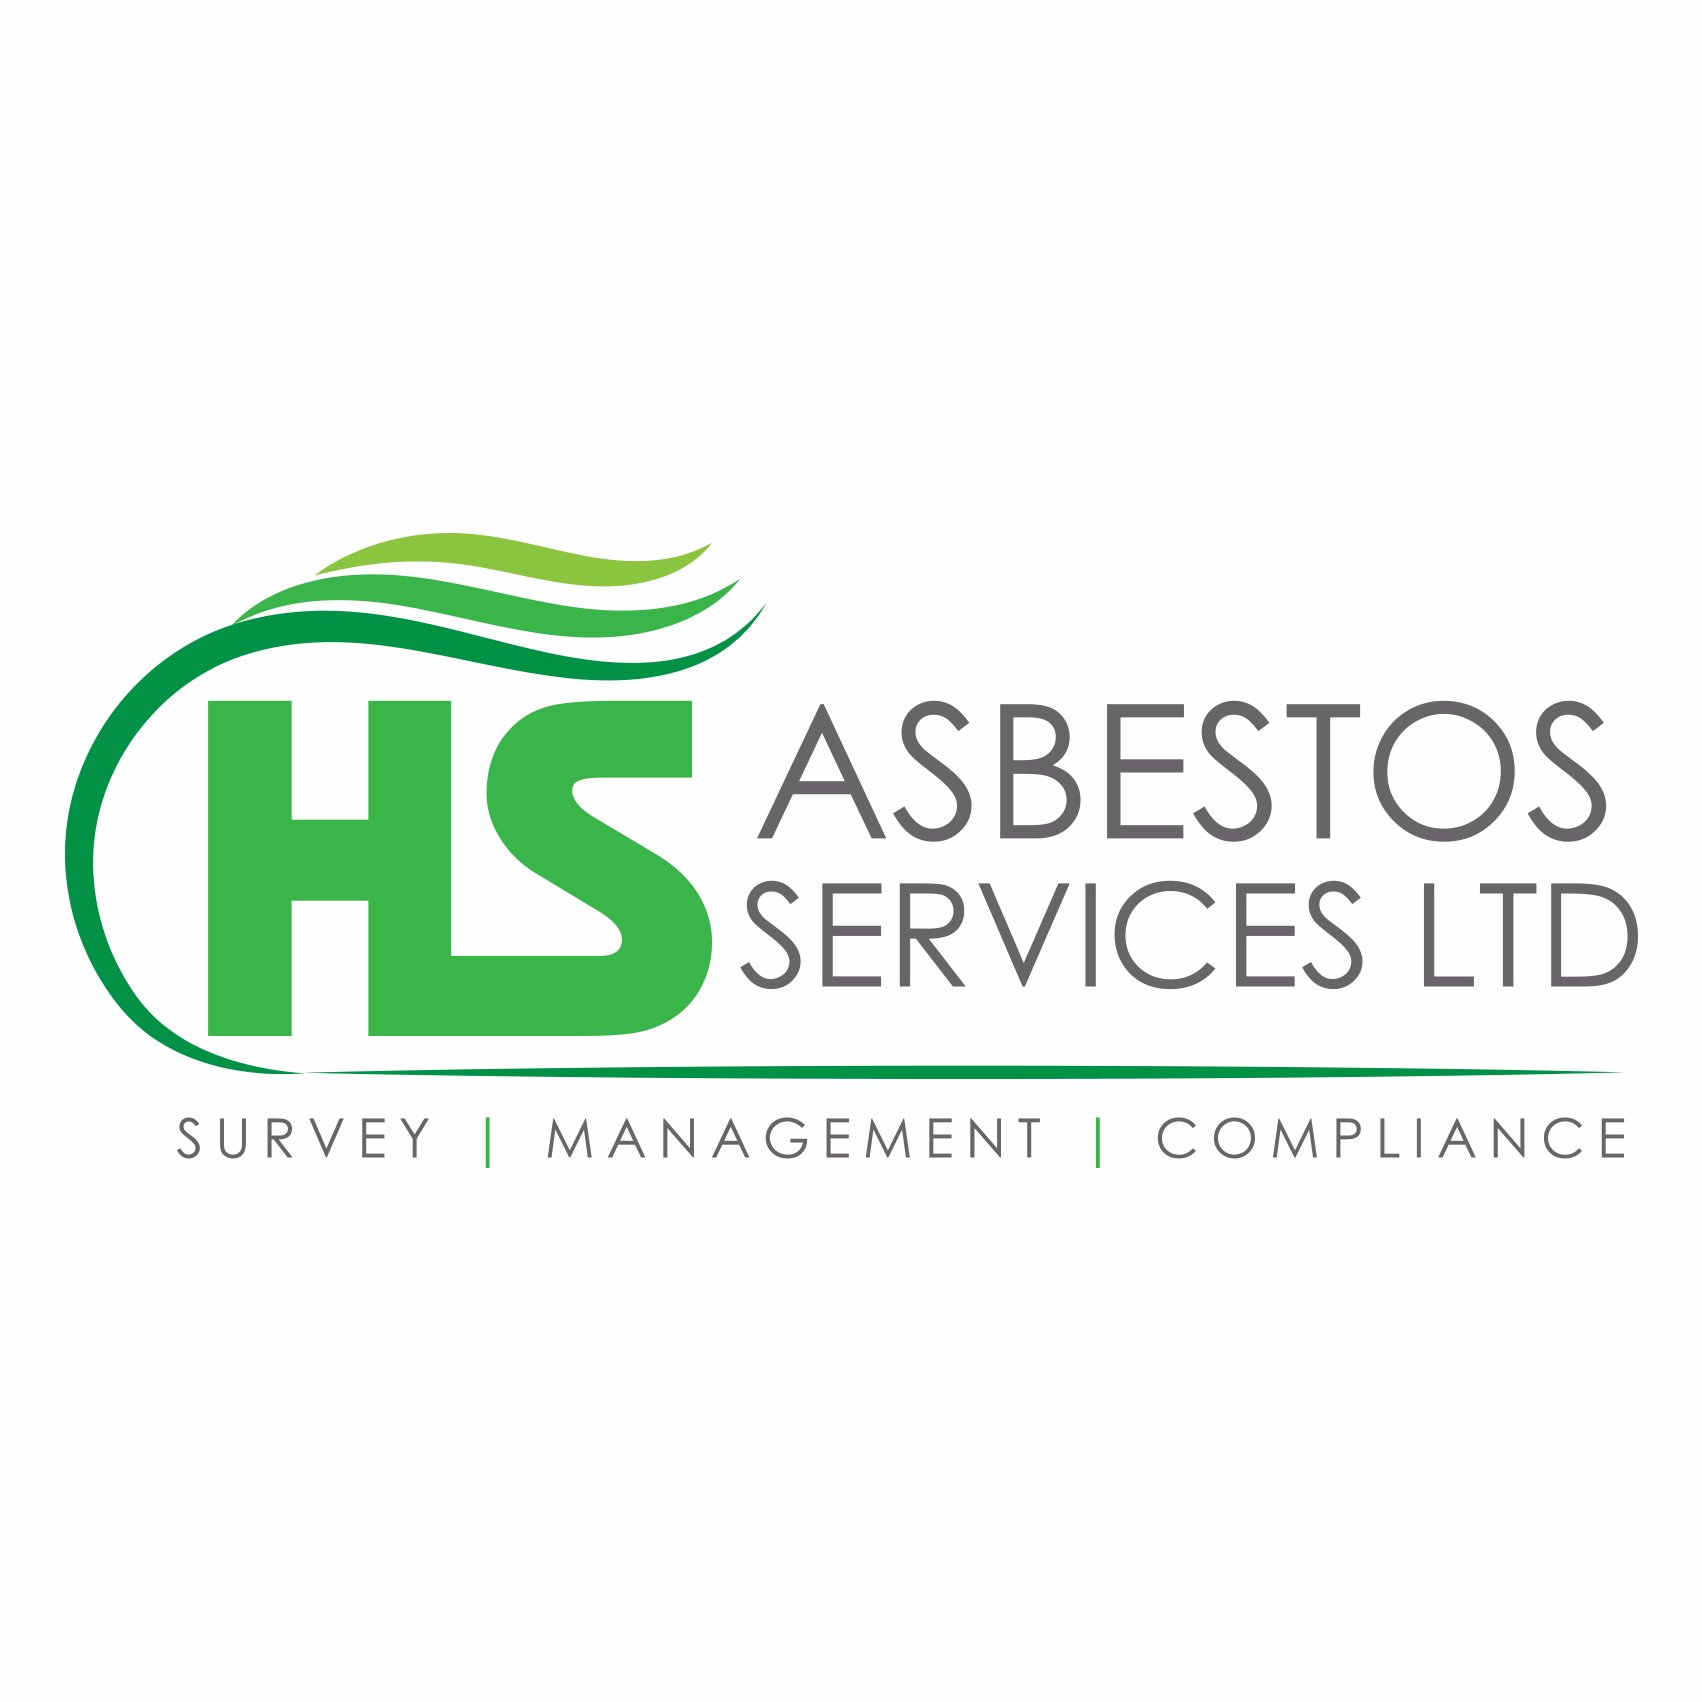 HS Asbestos Services Ltd committed to delivering safe, effective, cost-efficient asbestos services and are extremely proud of our Health & Safety record.